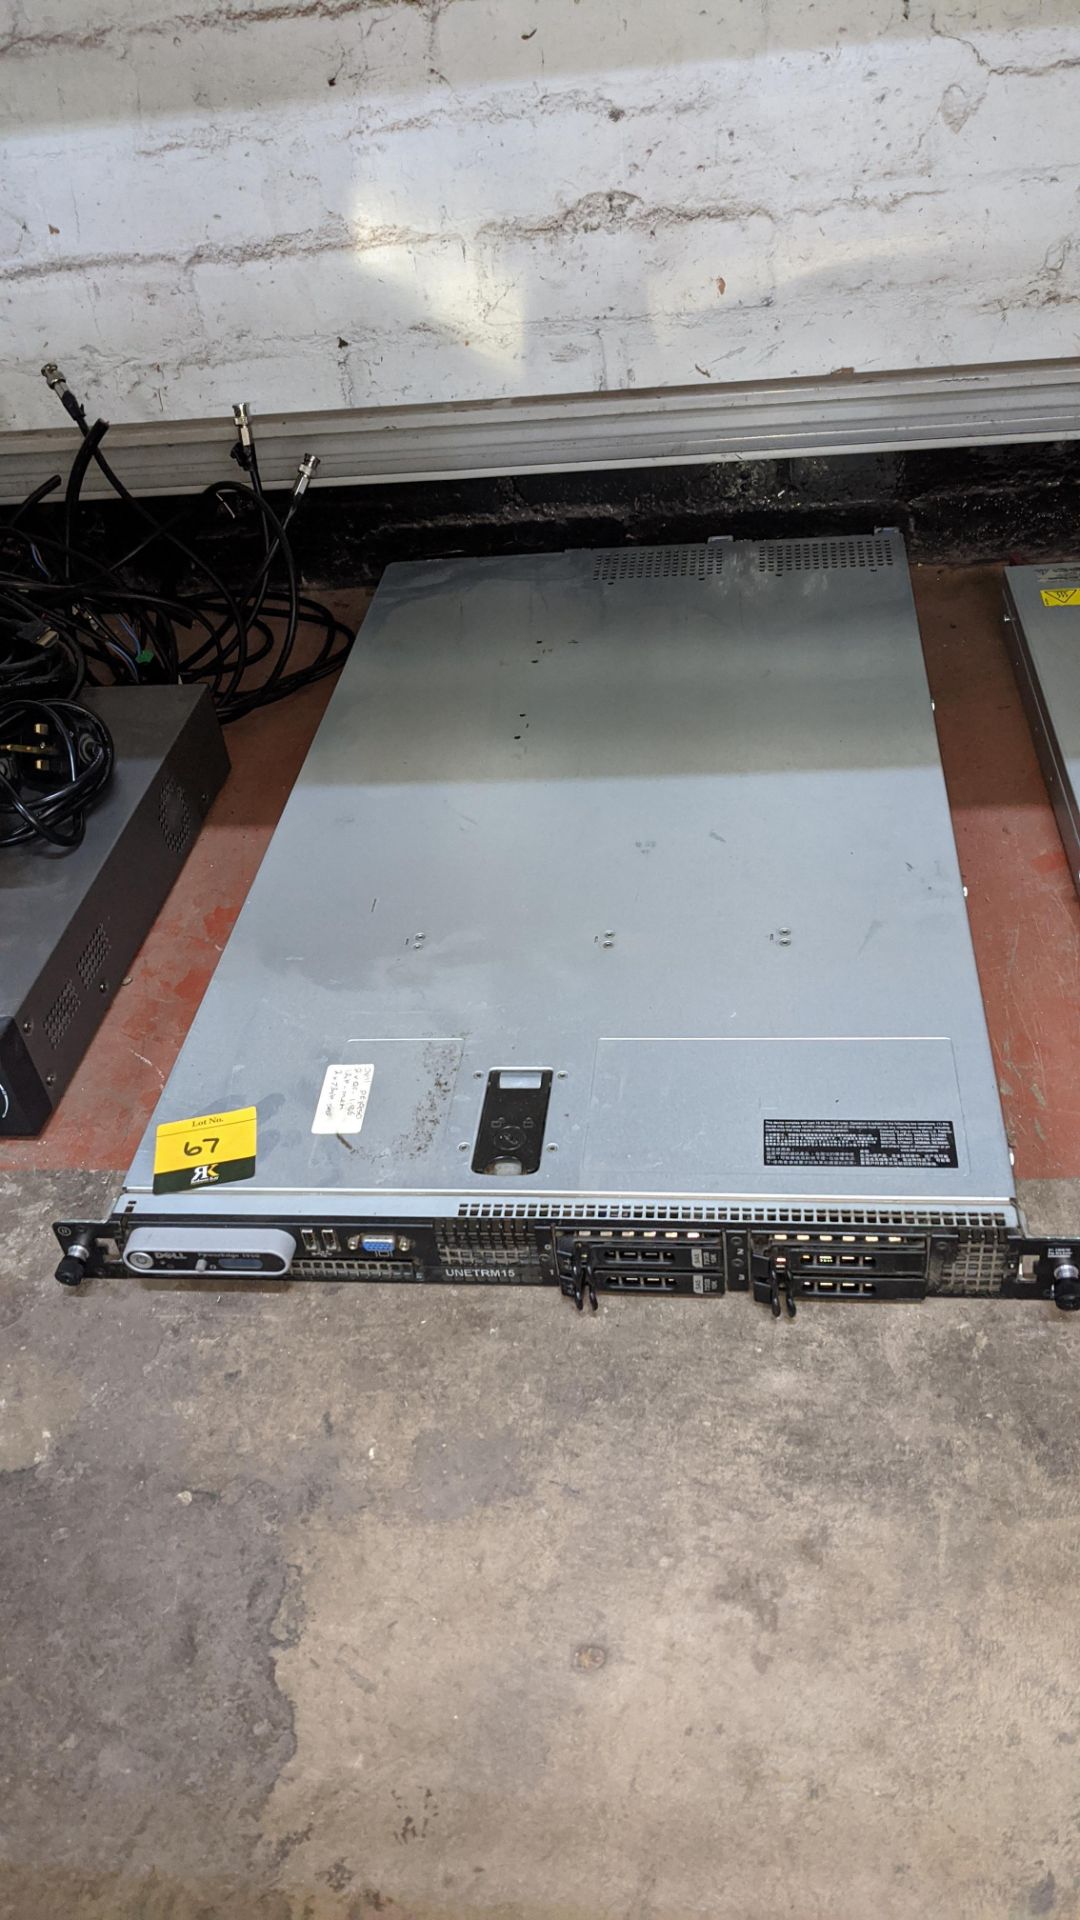 Dell PowerEdge 1950 rack mountable server. IMPORTANT: This auction is strictly subject to a two